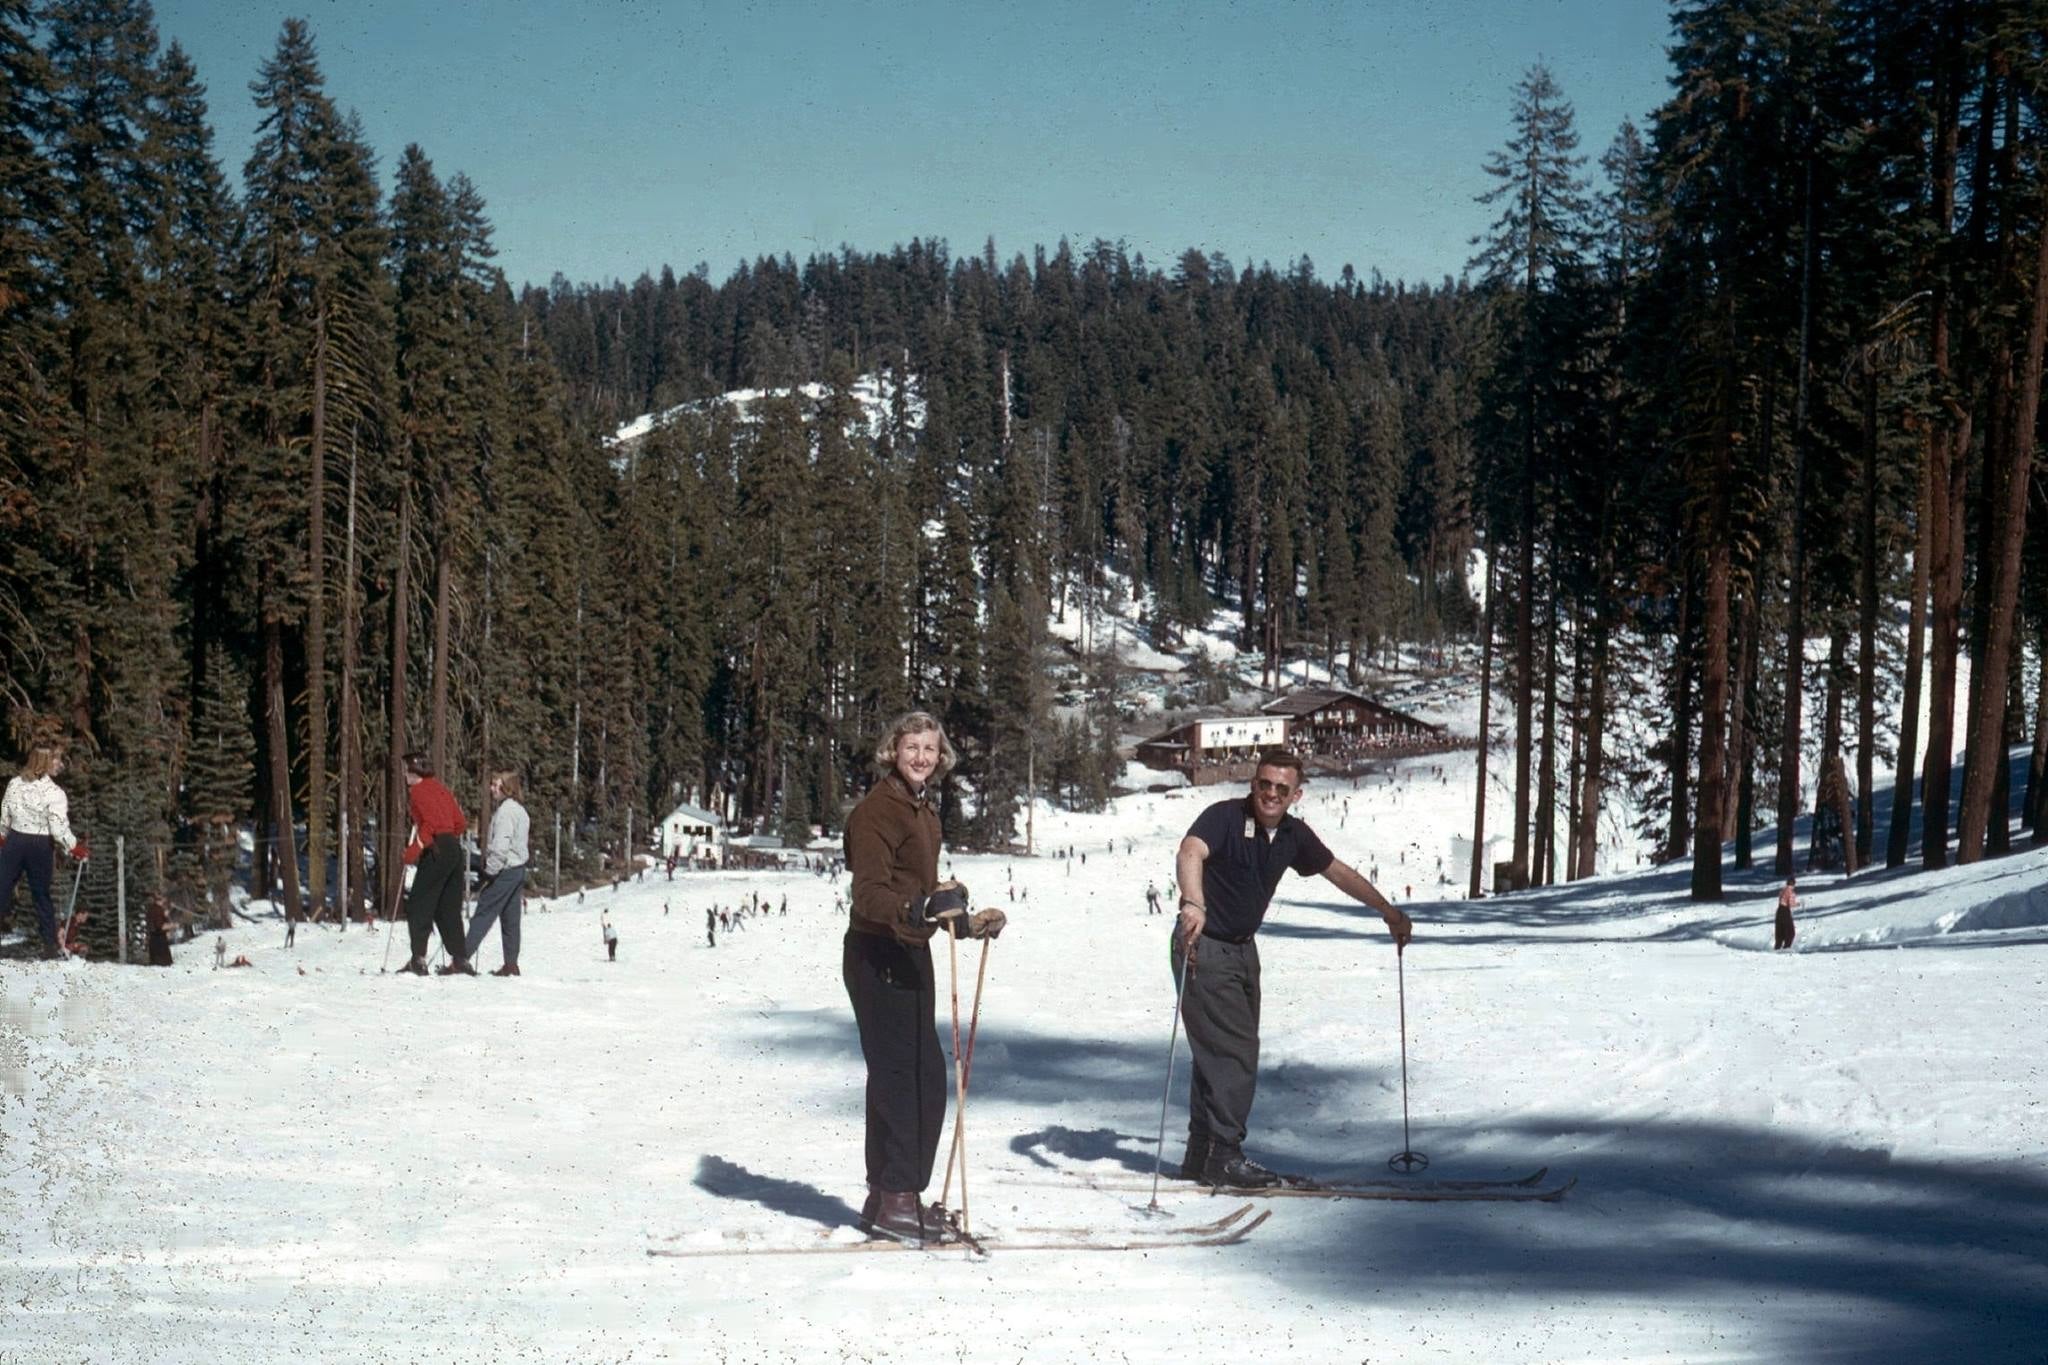 vintage photo of skiers in the foreground with a lodge in the background, badger pass circa 1950